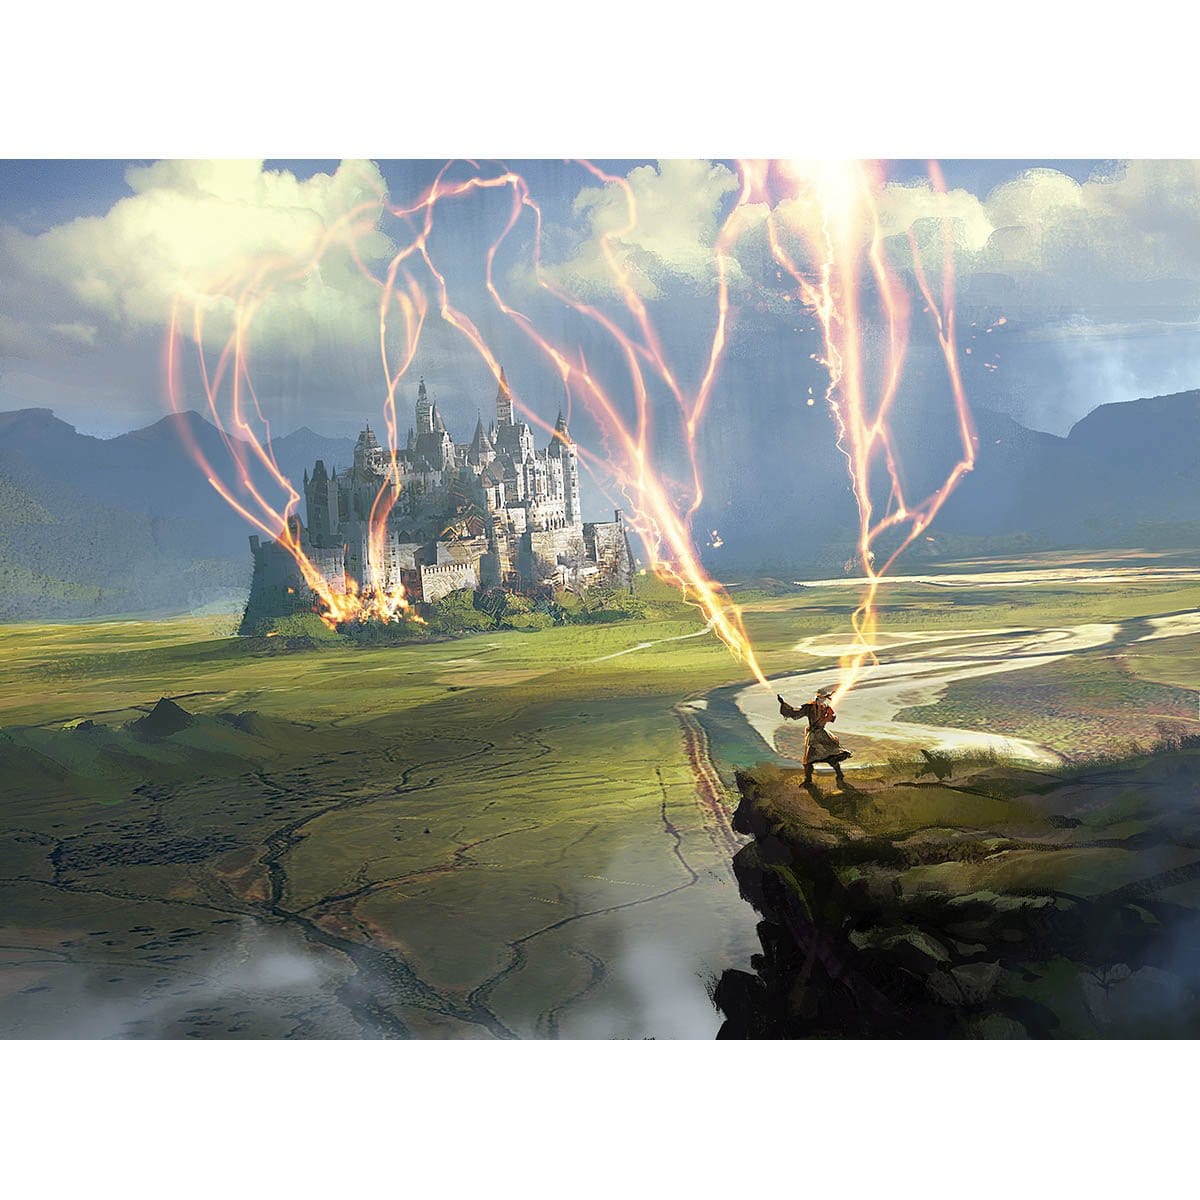 Wizard's Lightning Print - Print - Original Magic Art - Accessories for Magic the Gathering and other card games